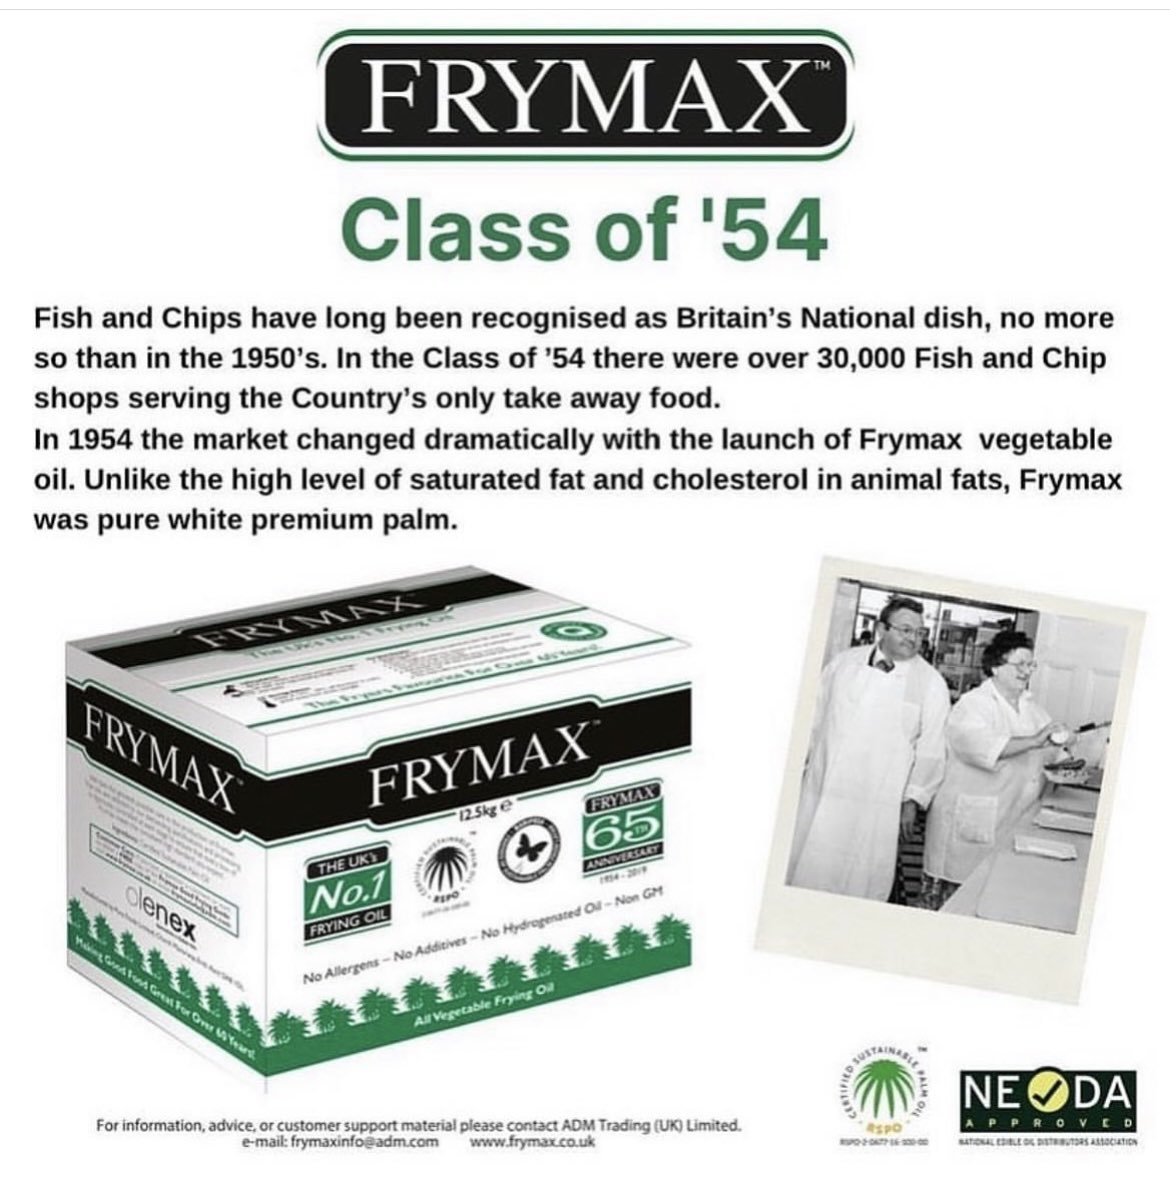 Fish and Chips have long been recognised as Britain’s National dish, no more so than in the 1950’s.

For more information click >>
library.myebook.com/FryMag/fry-apr…

#frymax #oil #palm #cookingoil #cook #fish #fishandchips@ #fishandchipshop #shop #chef #range #frying #fryingoil